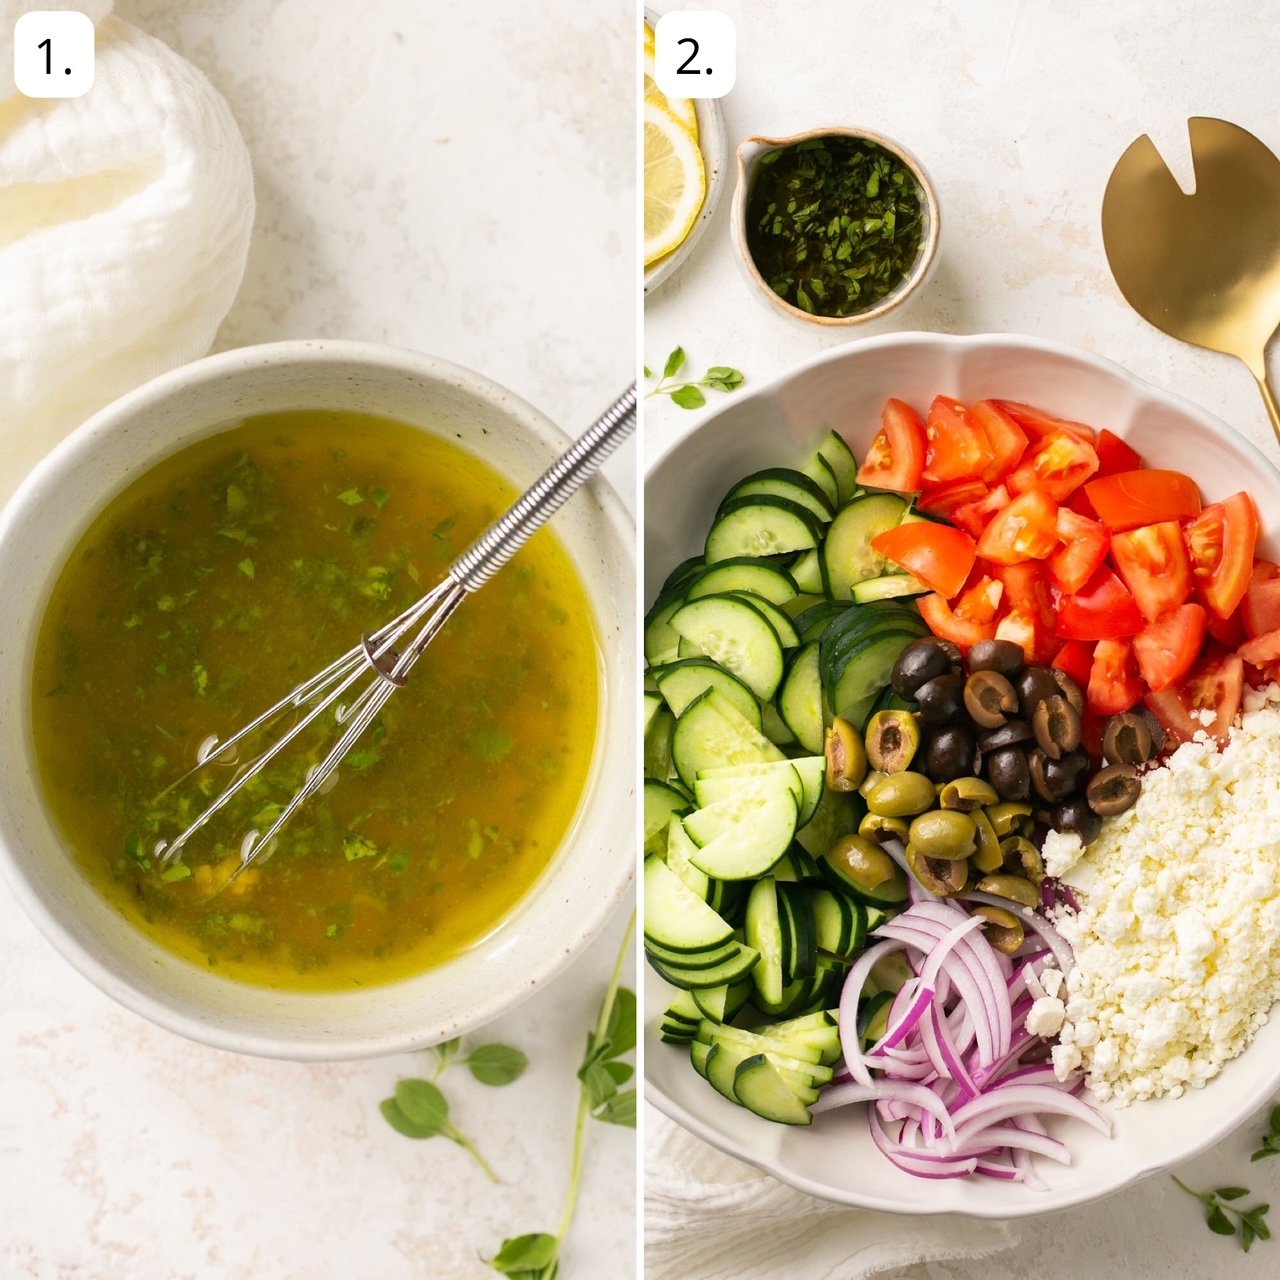 recipe step by step photos side by side